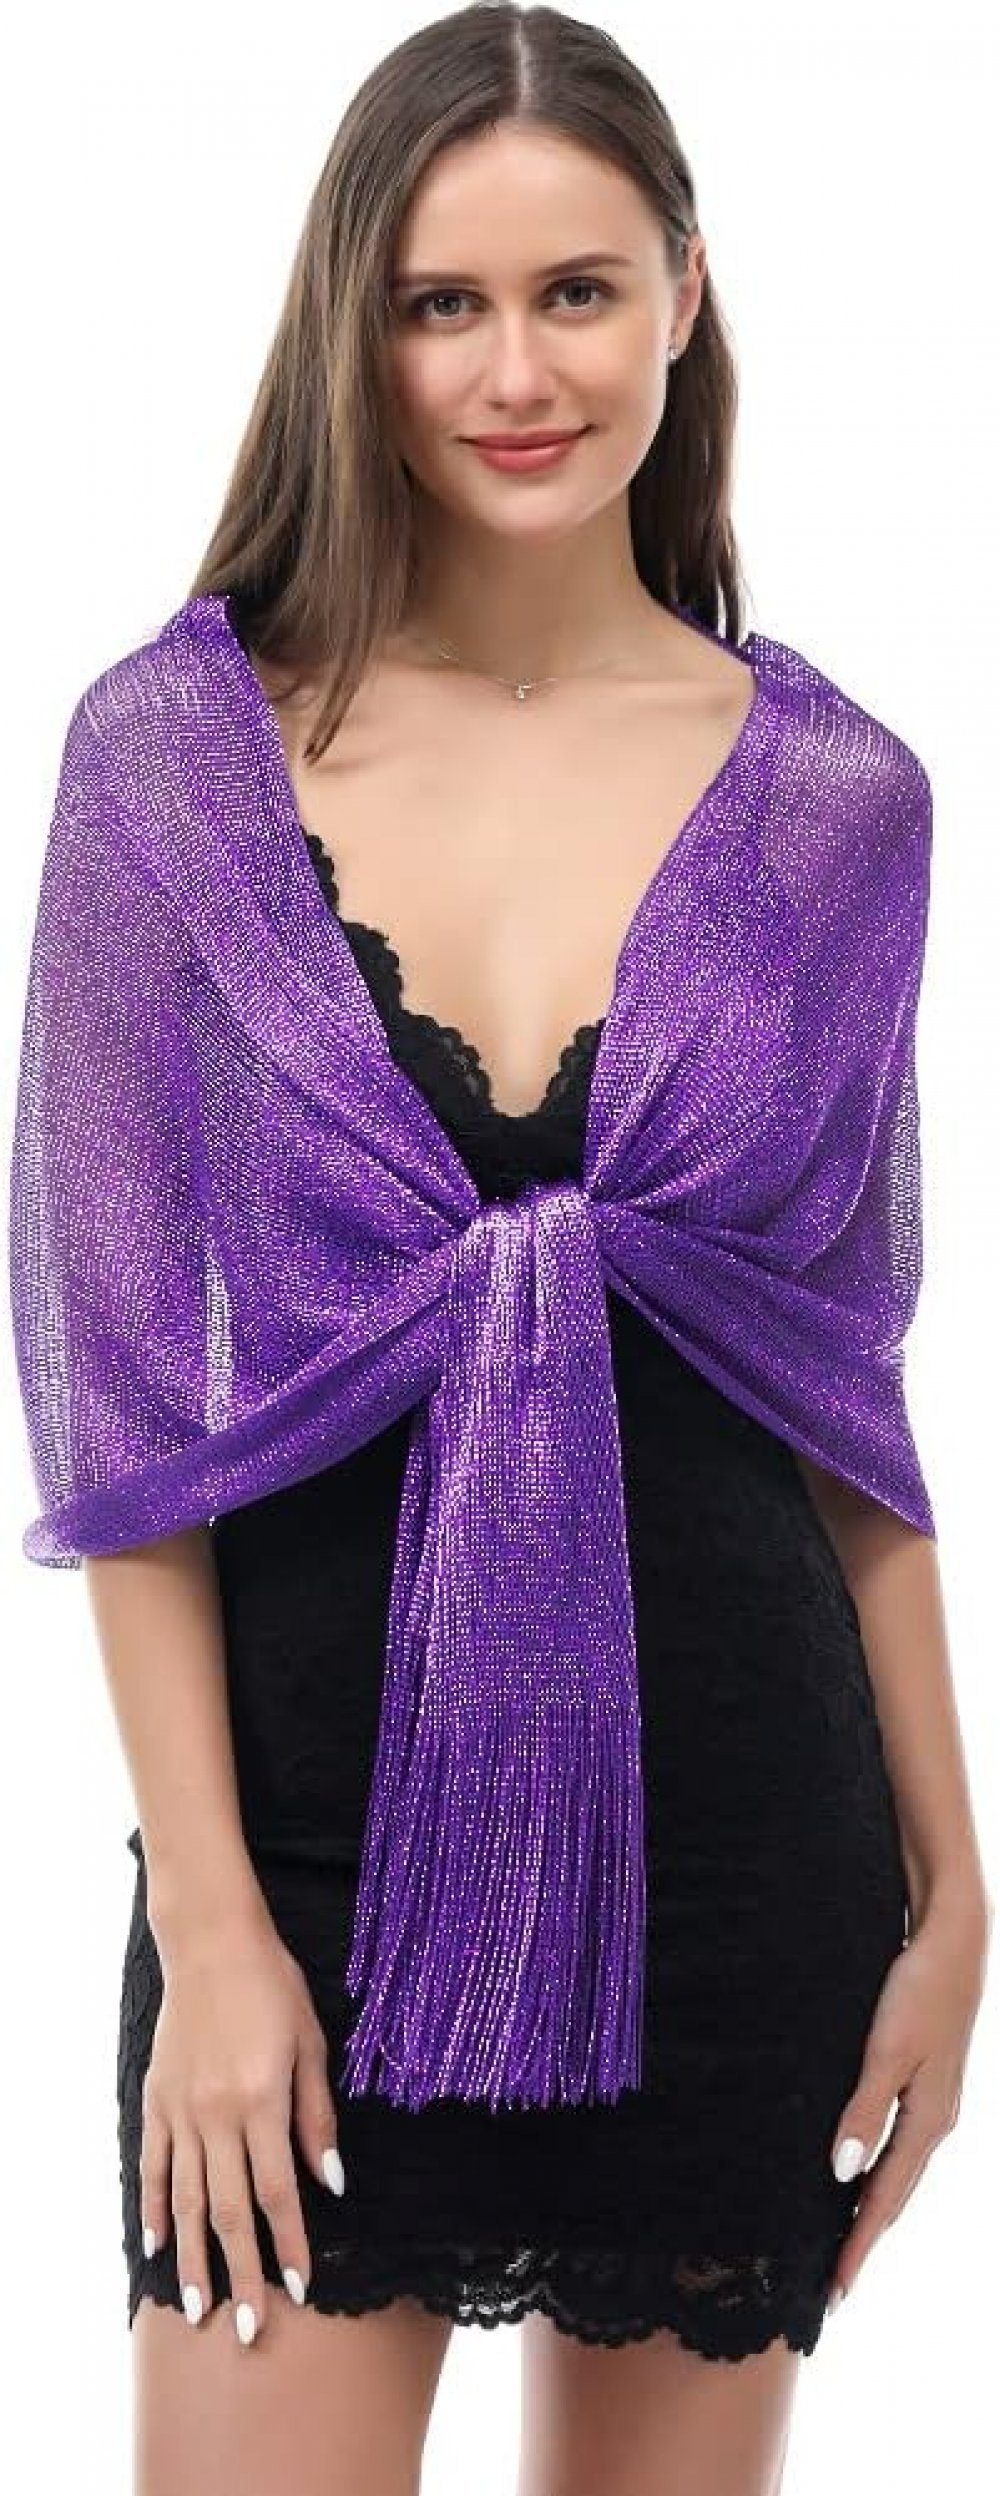 buckle Holiday for metal Tiefviolett suitable WaKuKa shawl parties evening sparkling Schal